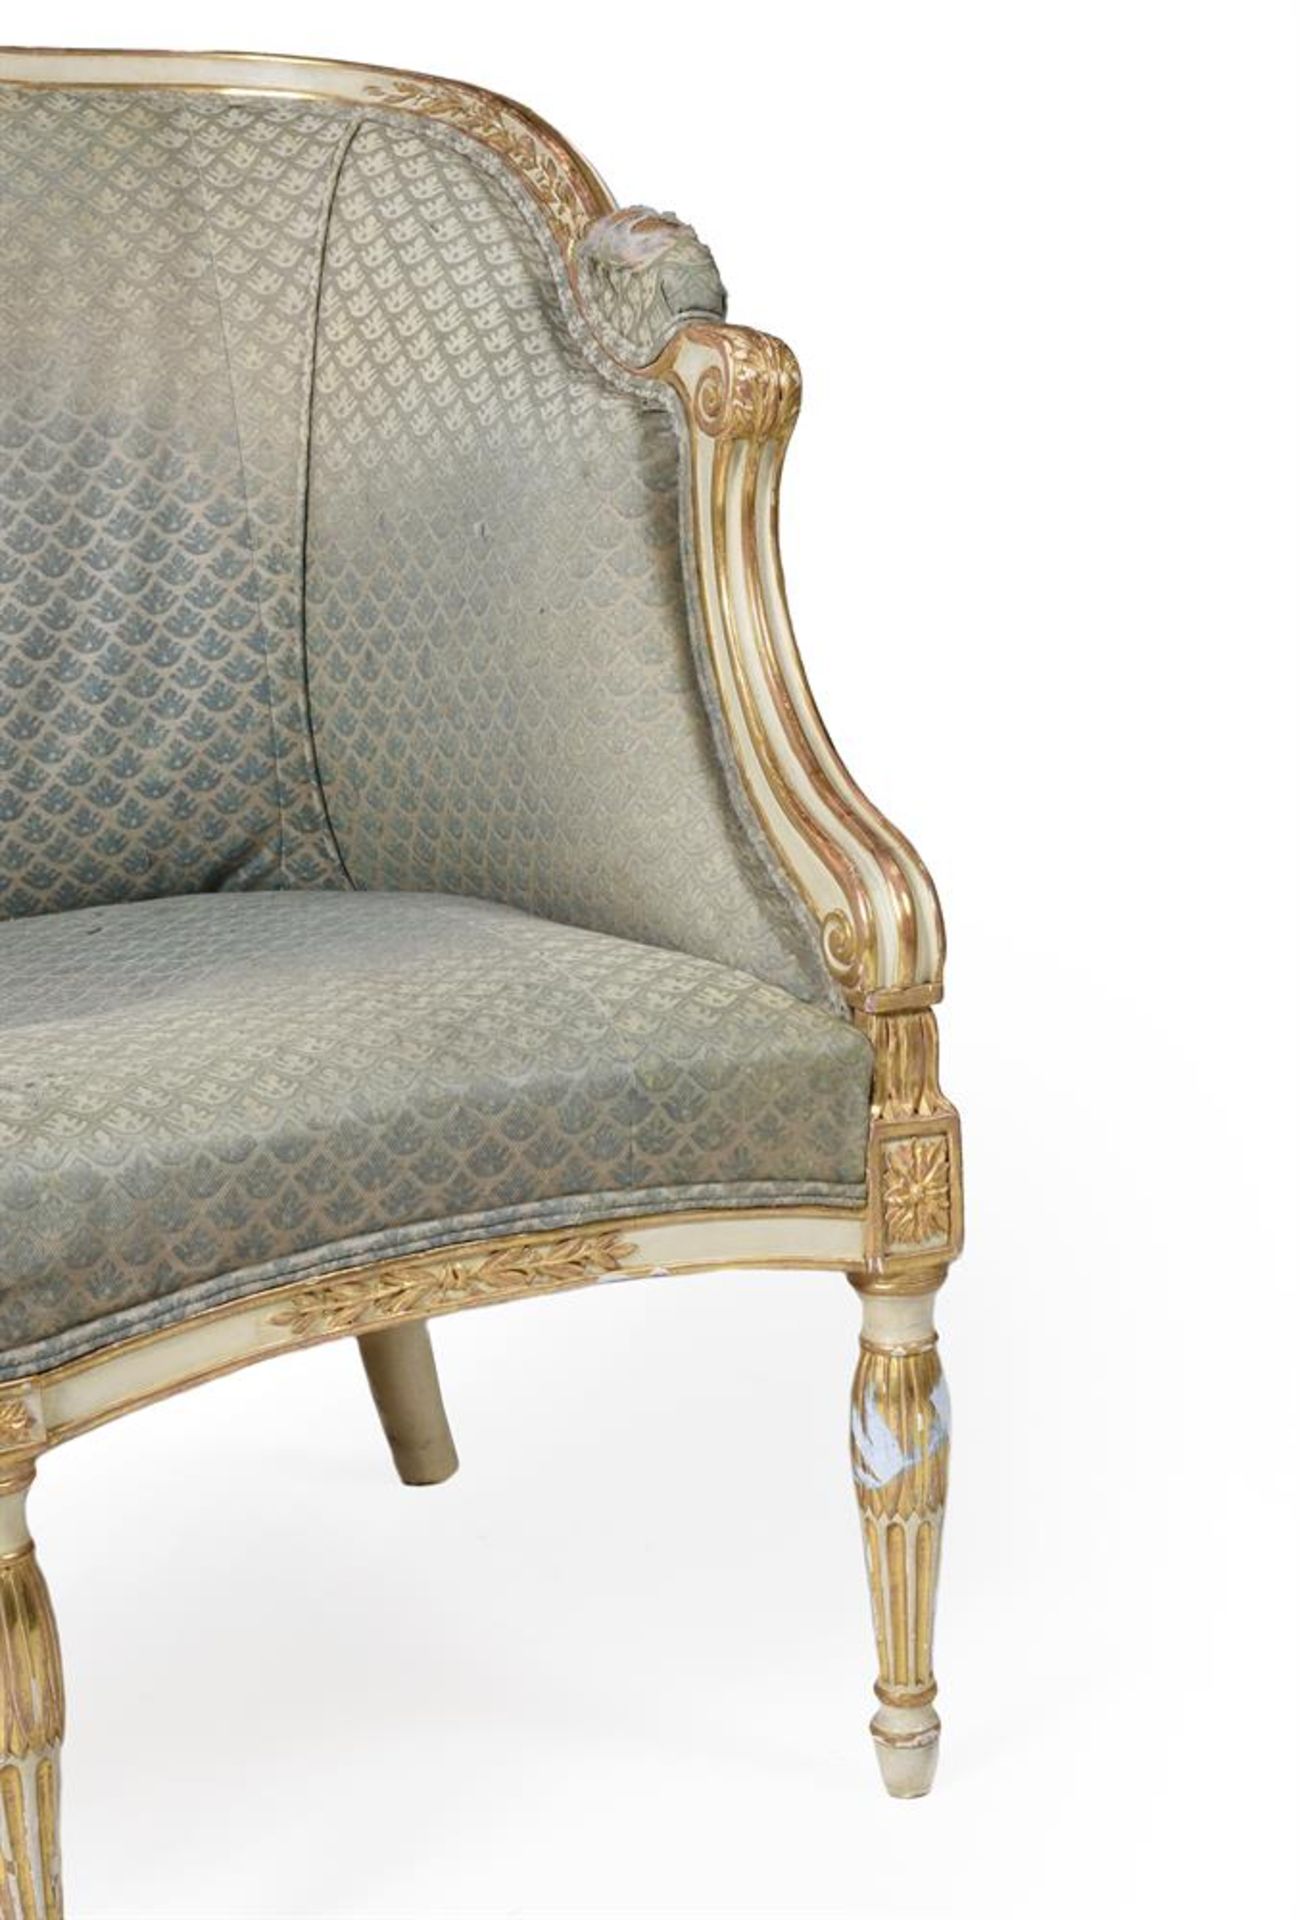 A GEORGE III CREAM PAINTED AND PARCEL GILT SOFA, IN THE MANNER OF DESIGNS BY LINNELL, CIRCA 1780 - Image 3 of 3